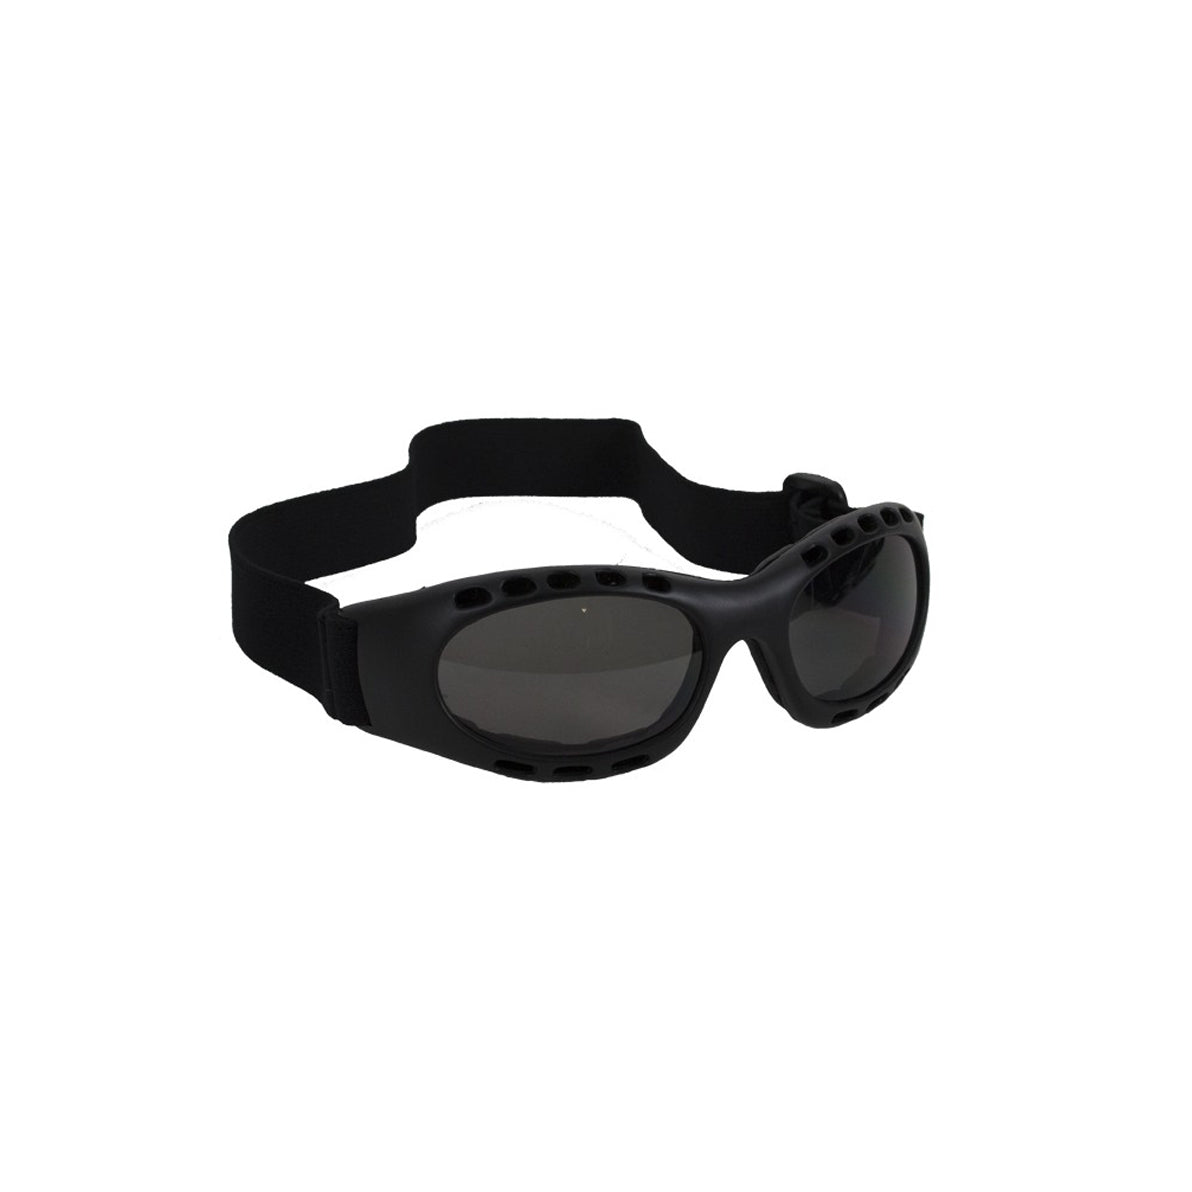 Goggles with Smoke Lens